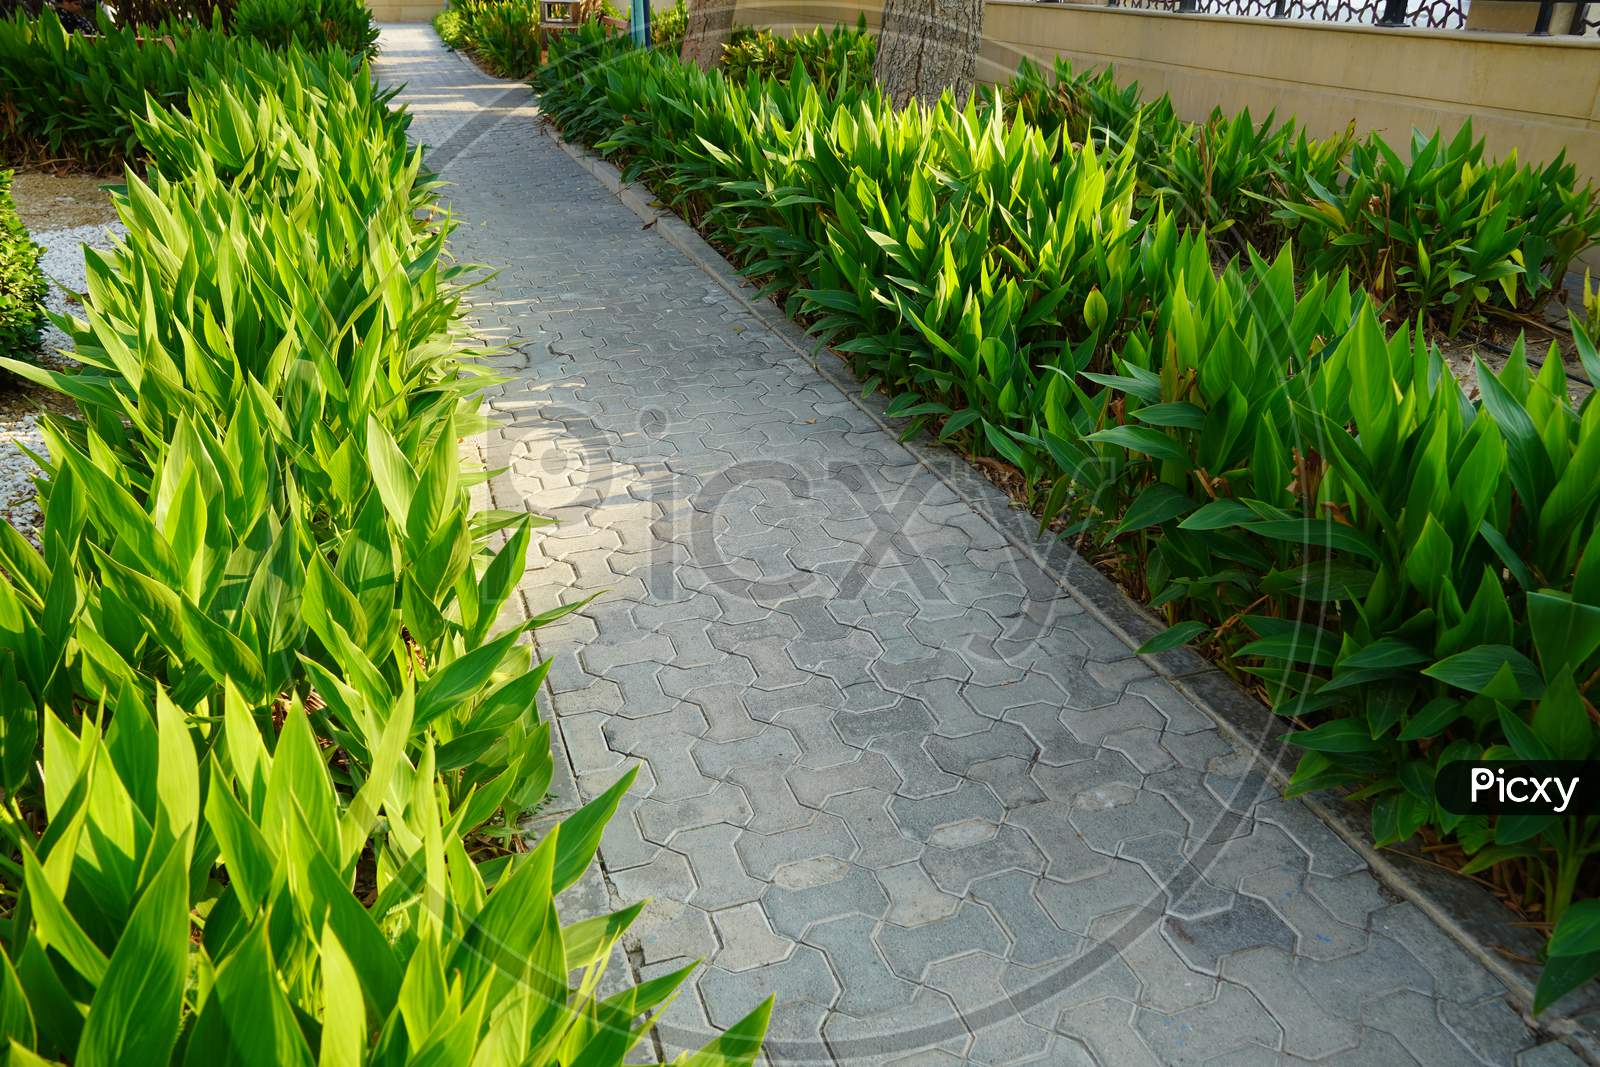 Scenic View Of Landscaped Path With Plants And Stones In Yard. Backyard Of Residential House. Stone Pedestrian Sidewalk Going Into The Distance Among Landscaping In Home Garden. Concrete Pavement.